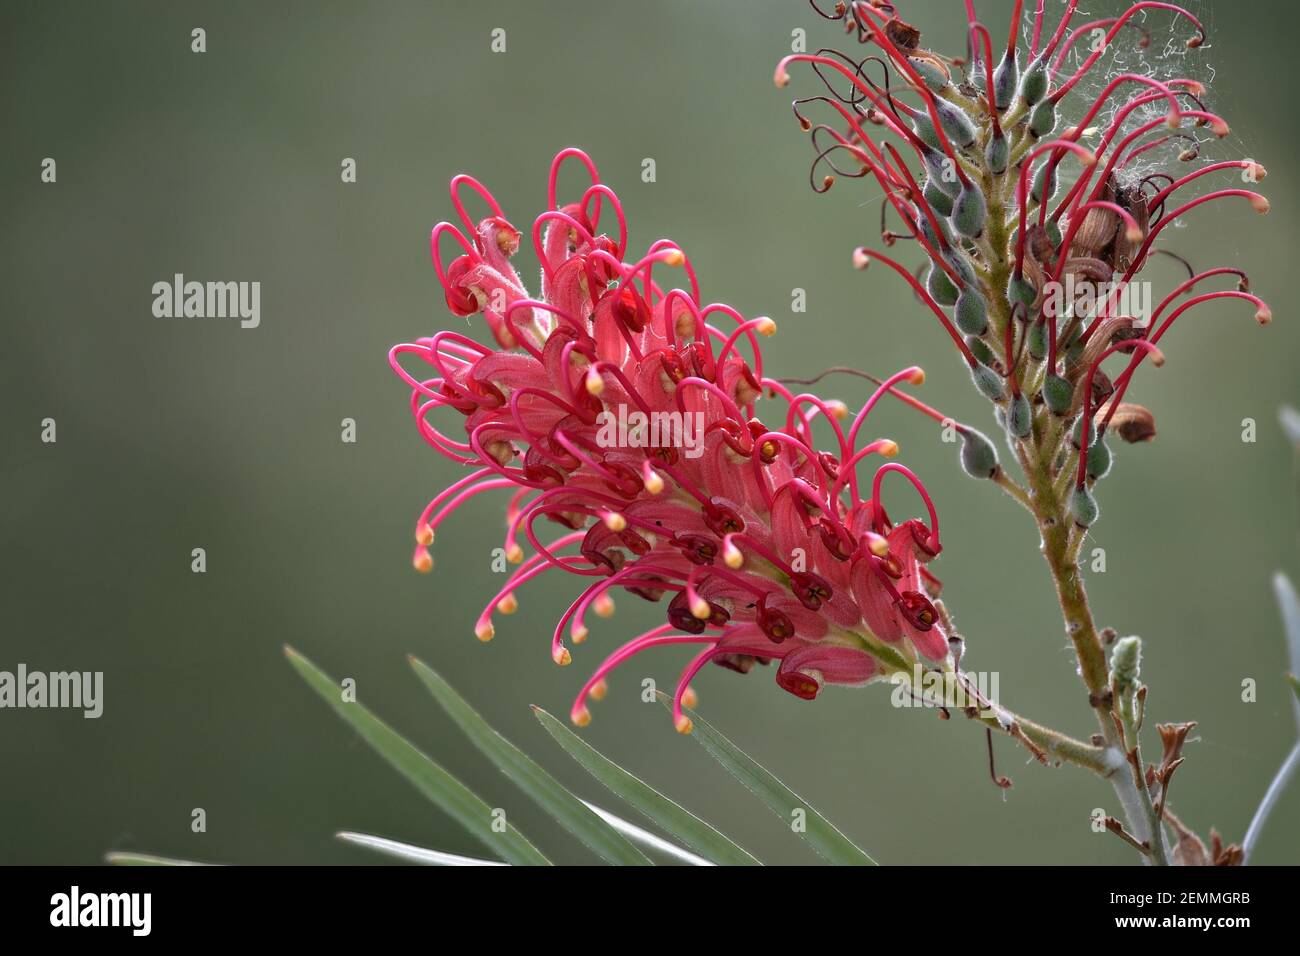 Grevillea banksii, a native evergreen flowering plant composition on a natural green background. Stock Photo